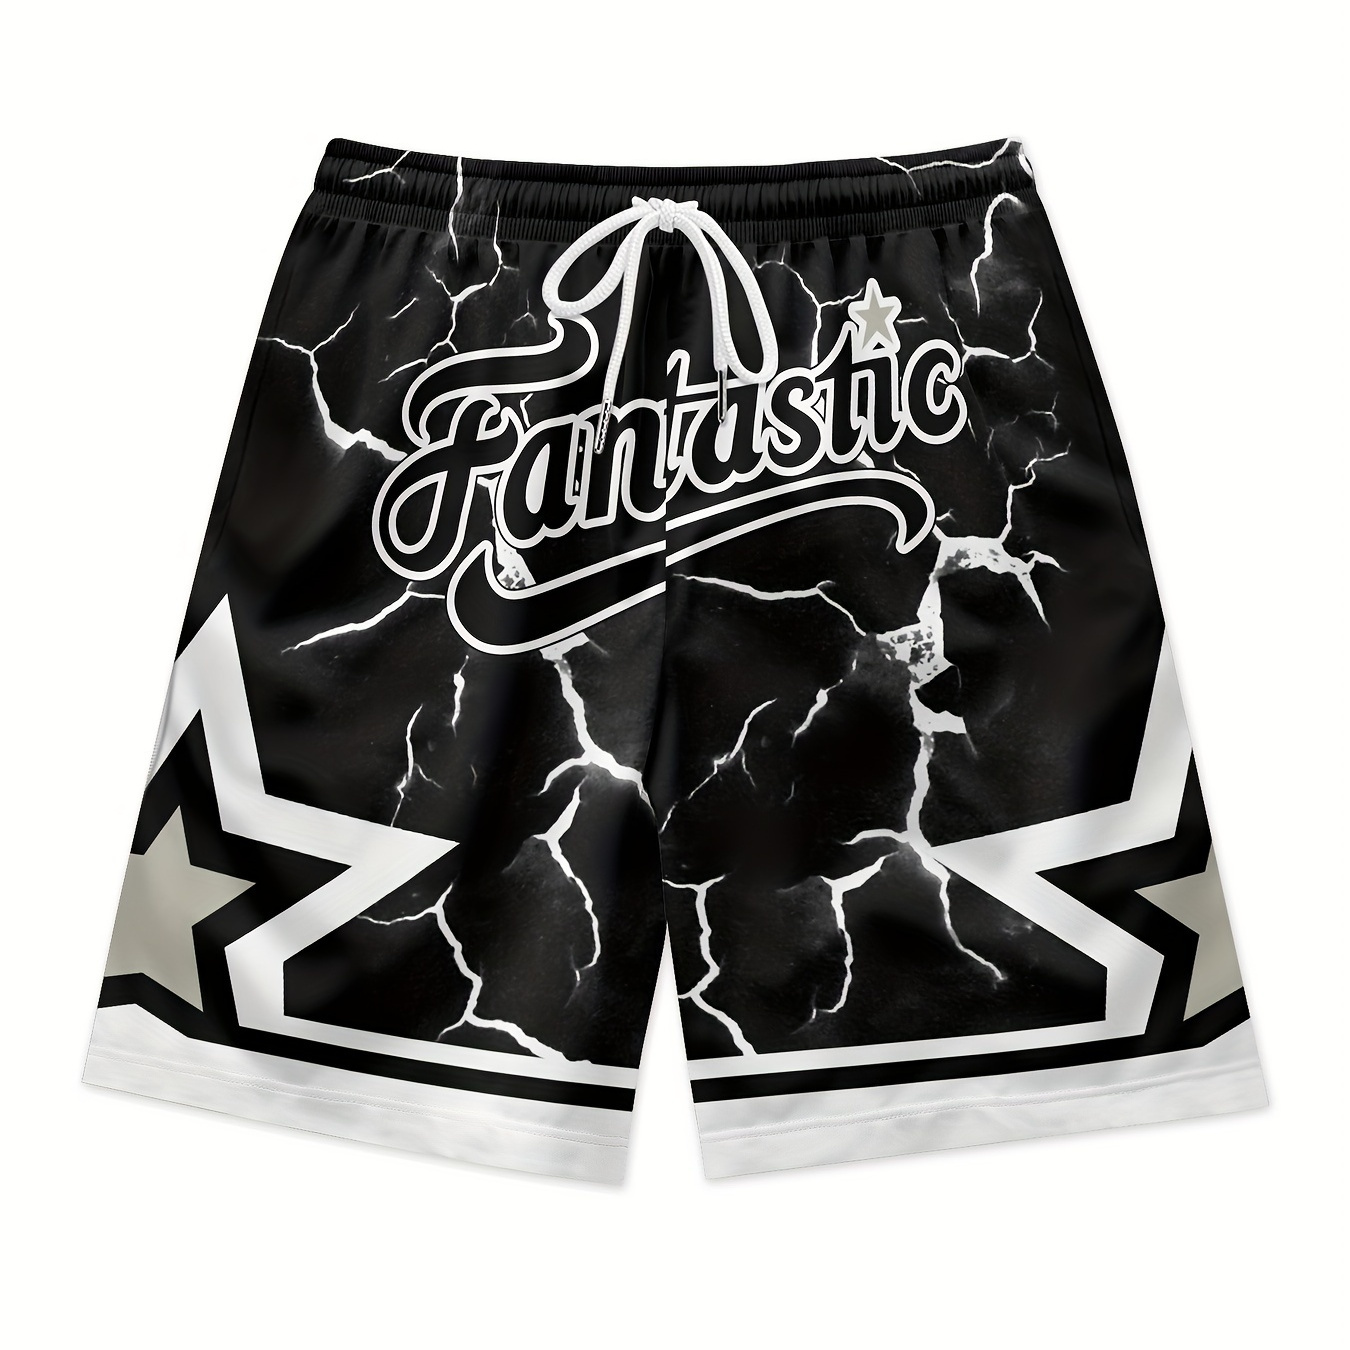 

Men's Summer Black Waist Shorts Letters Print Quick Dry Breathable Polyester Shorts Daily Streetwear Vacation Stylish Shorts Basketball Shorts Sport Clothing Bottoms